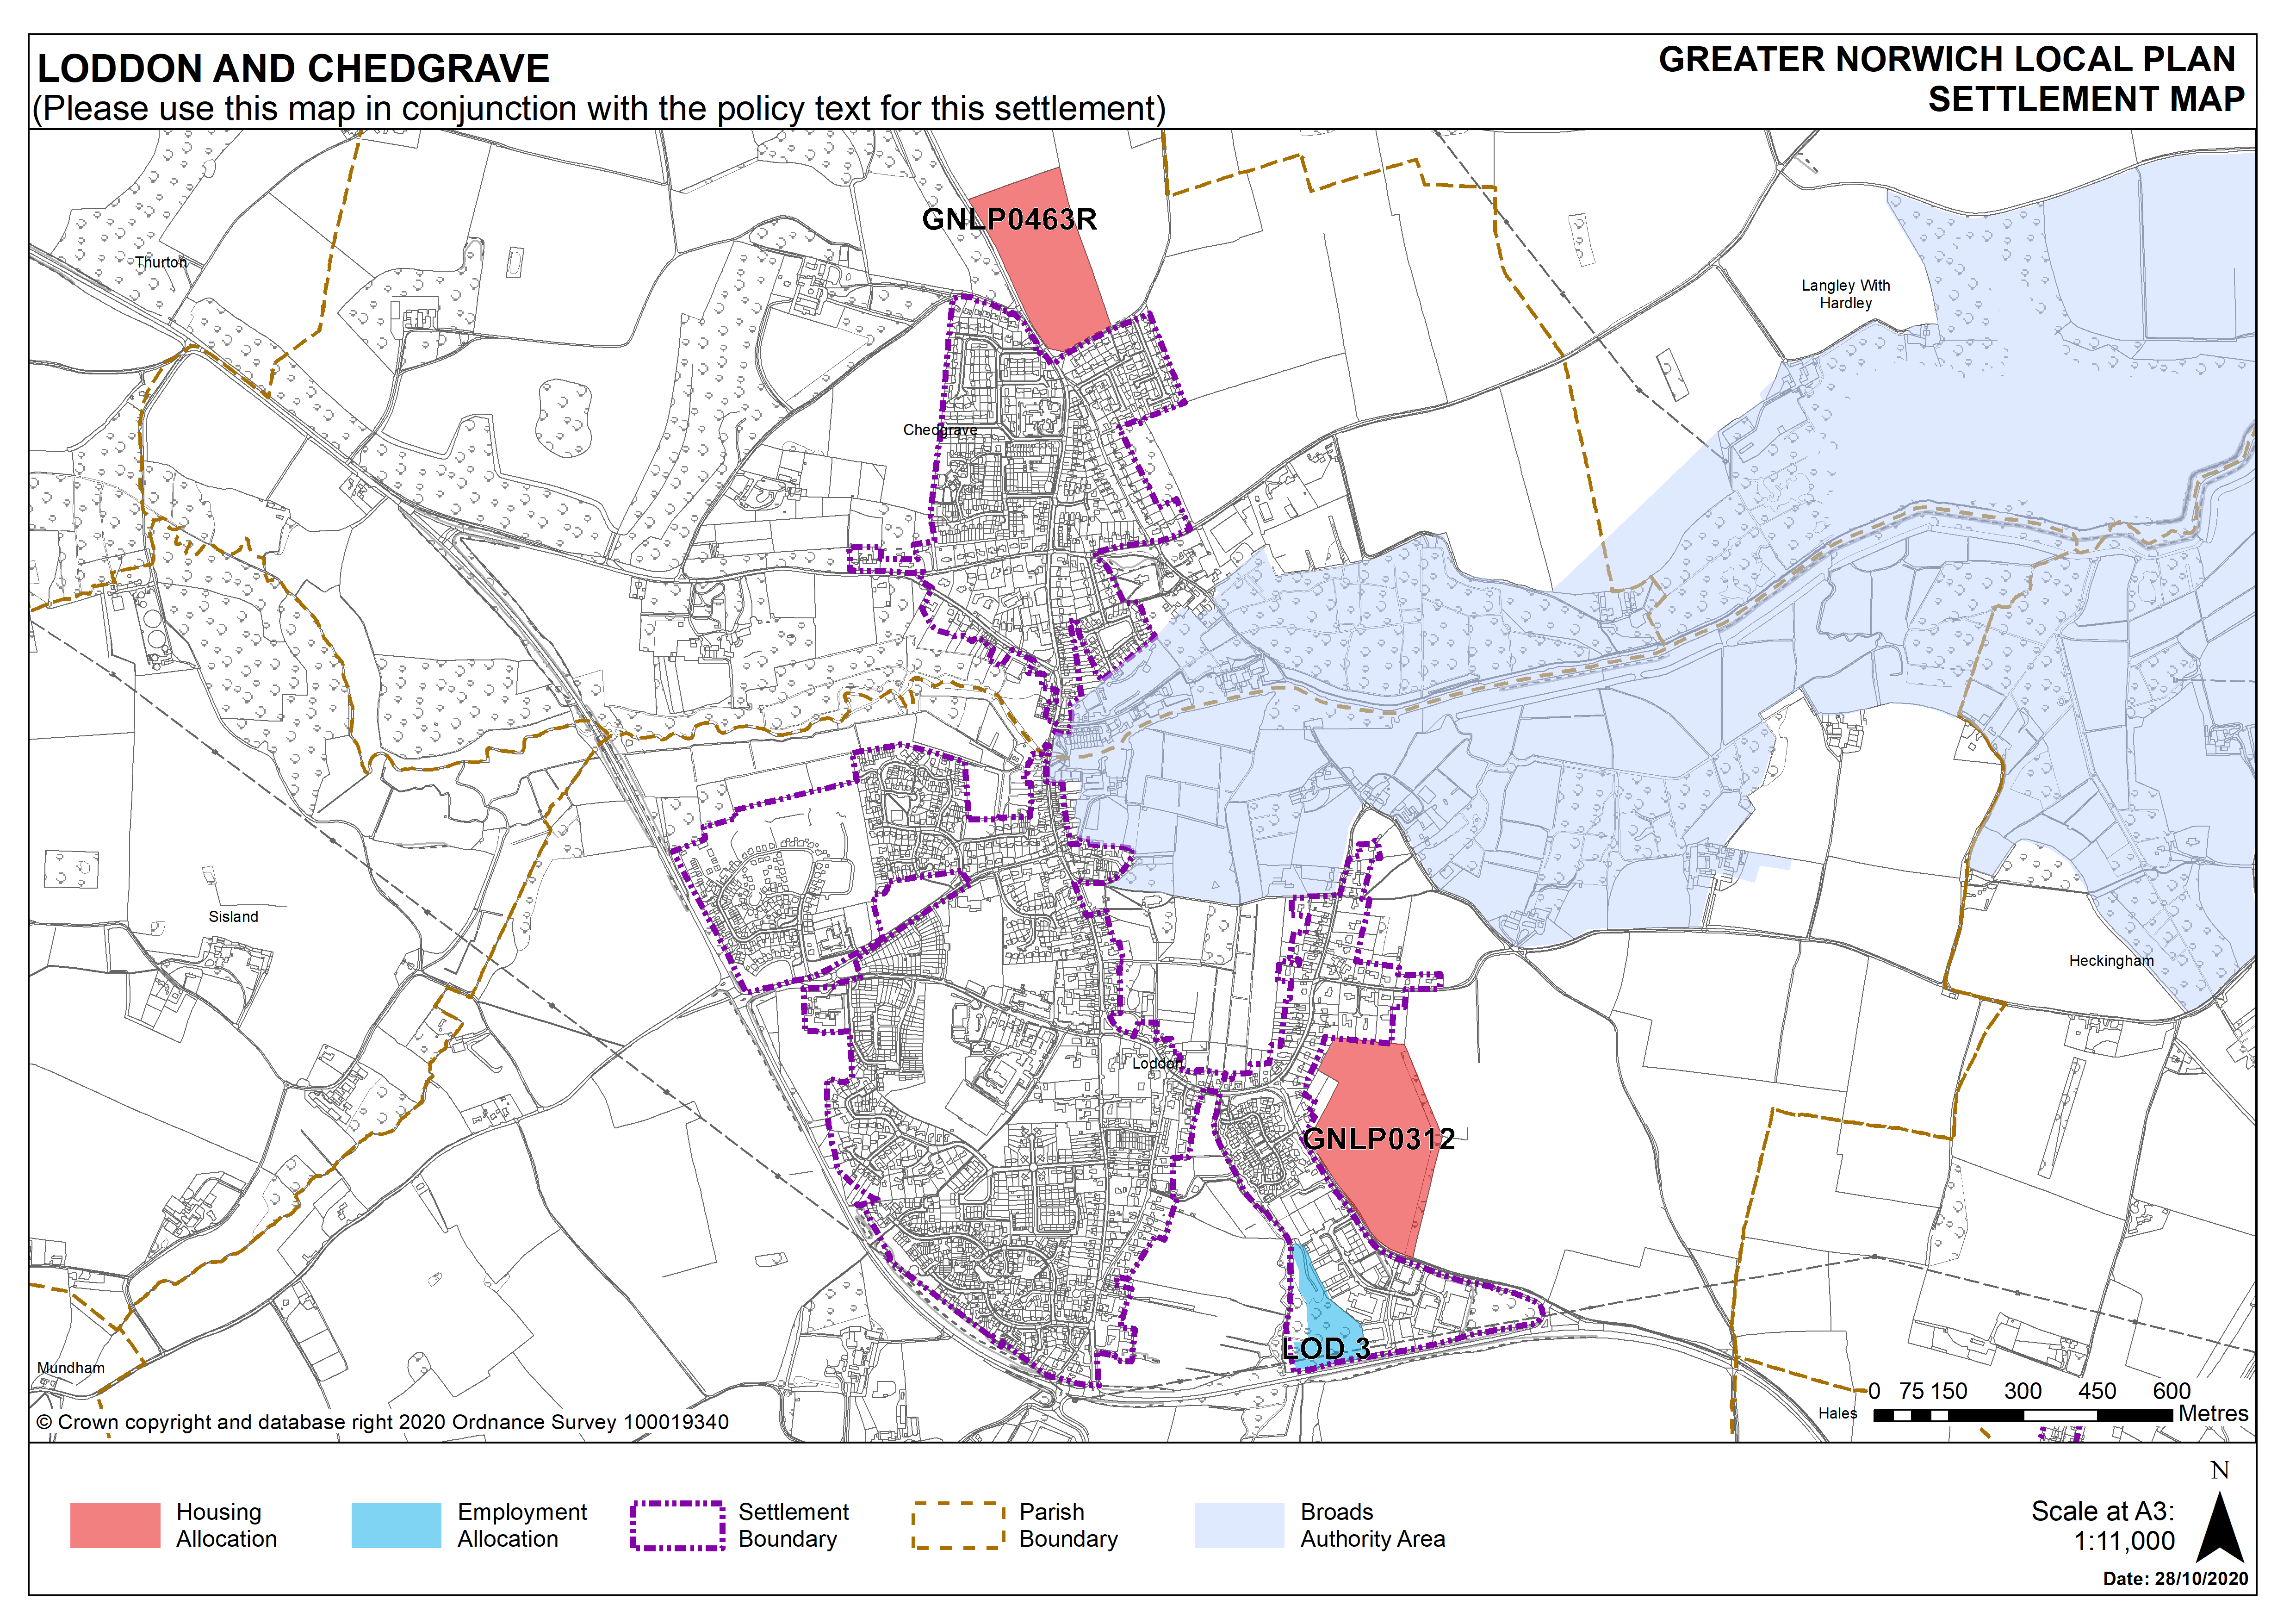 Loddon and Chedgrave Settlement Map